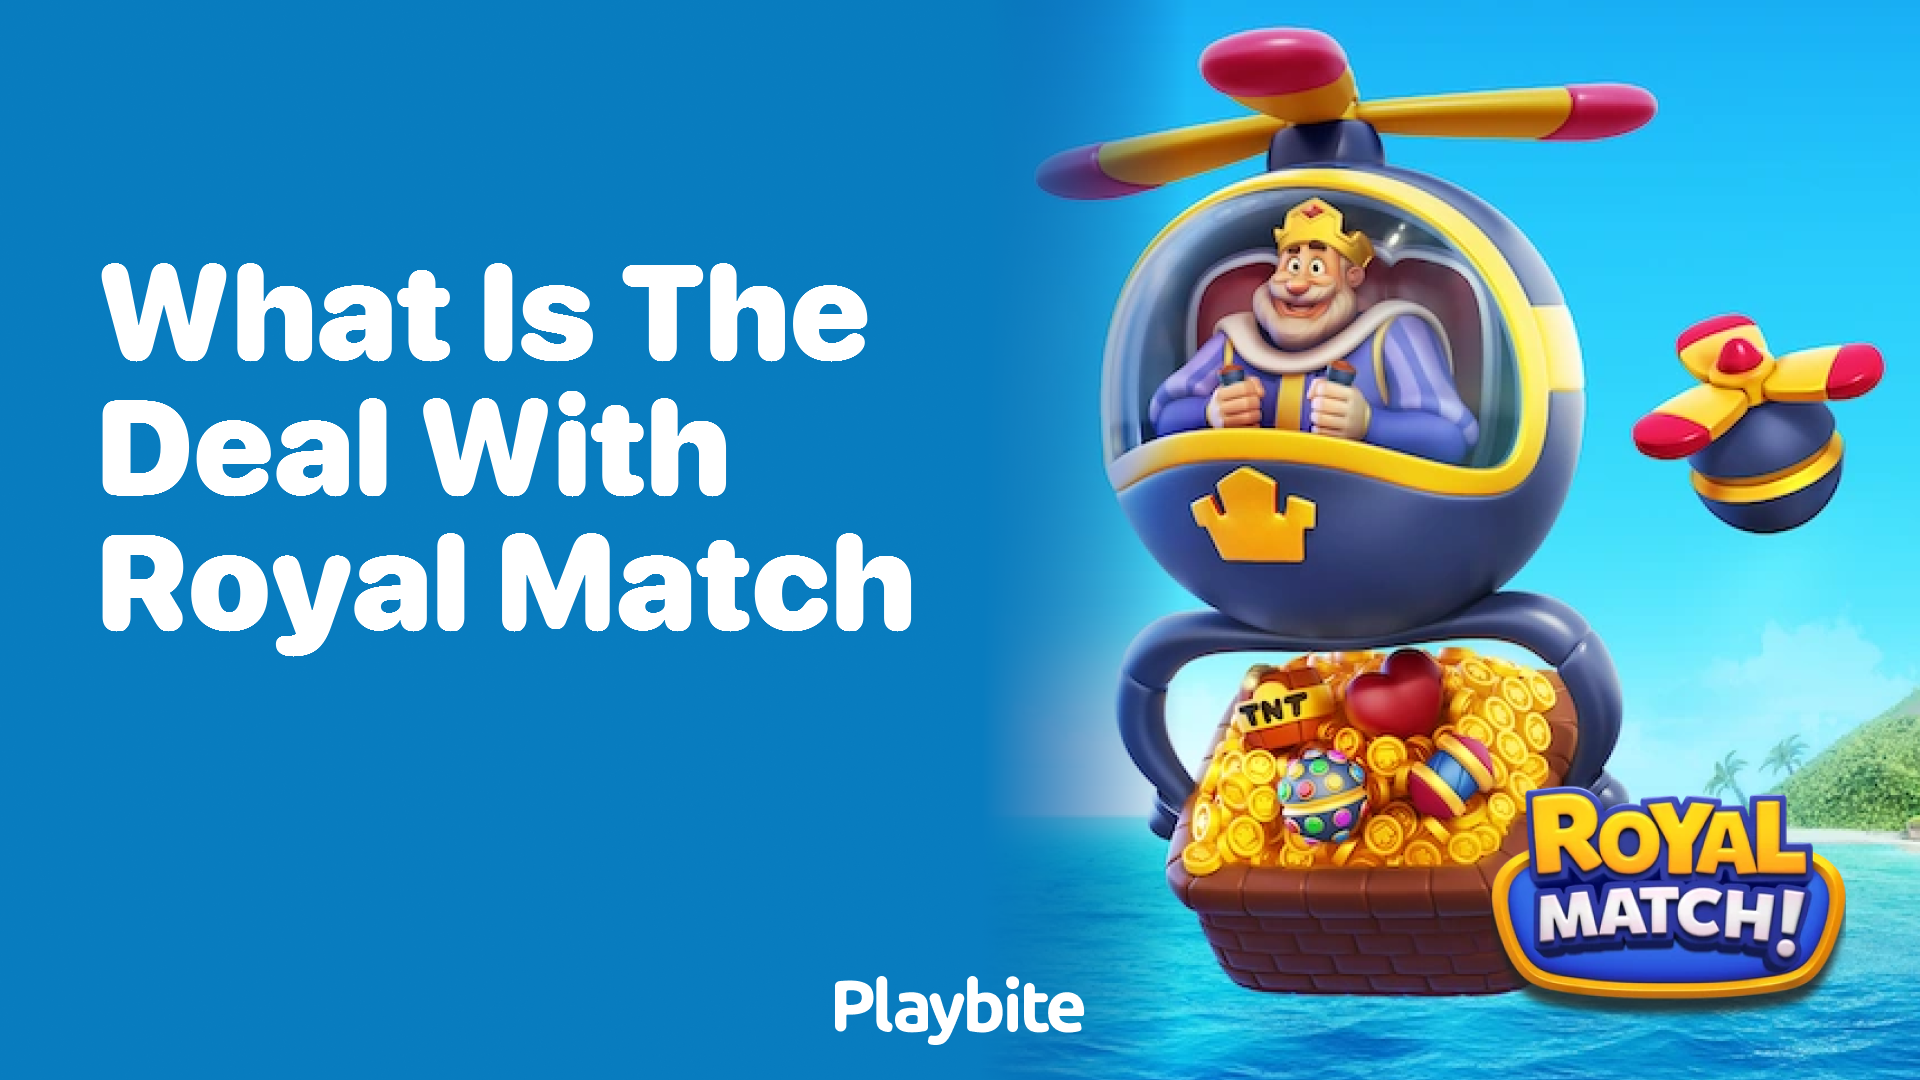 What is the Deal with Royal Match?